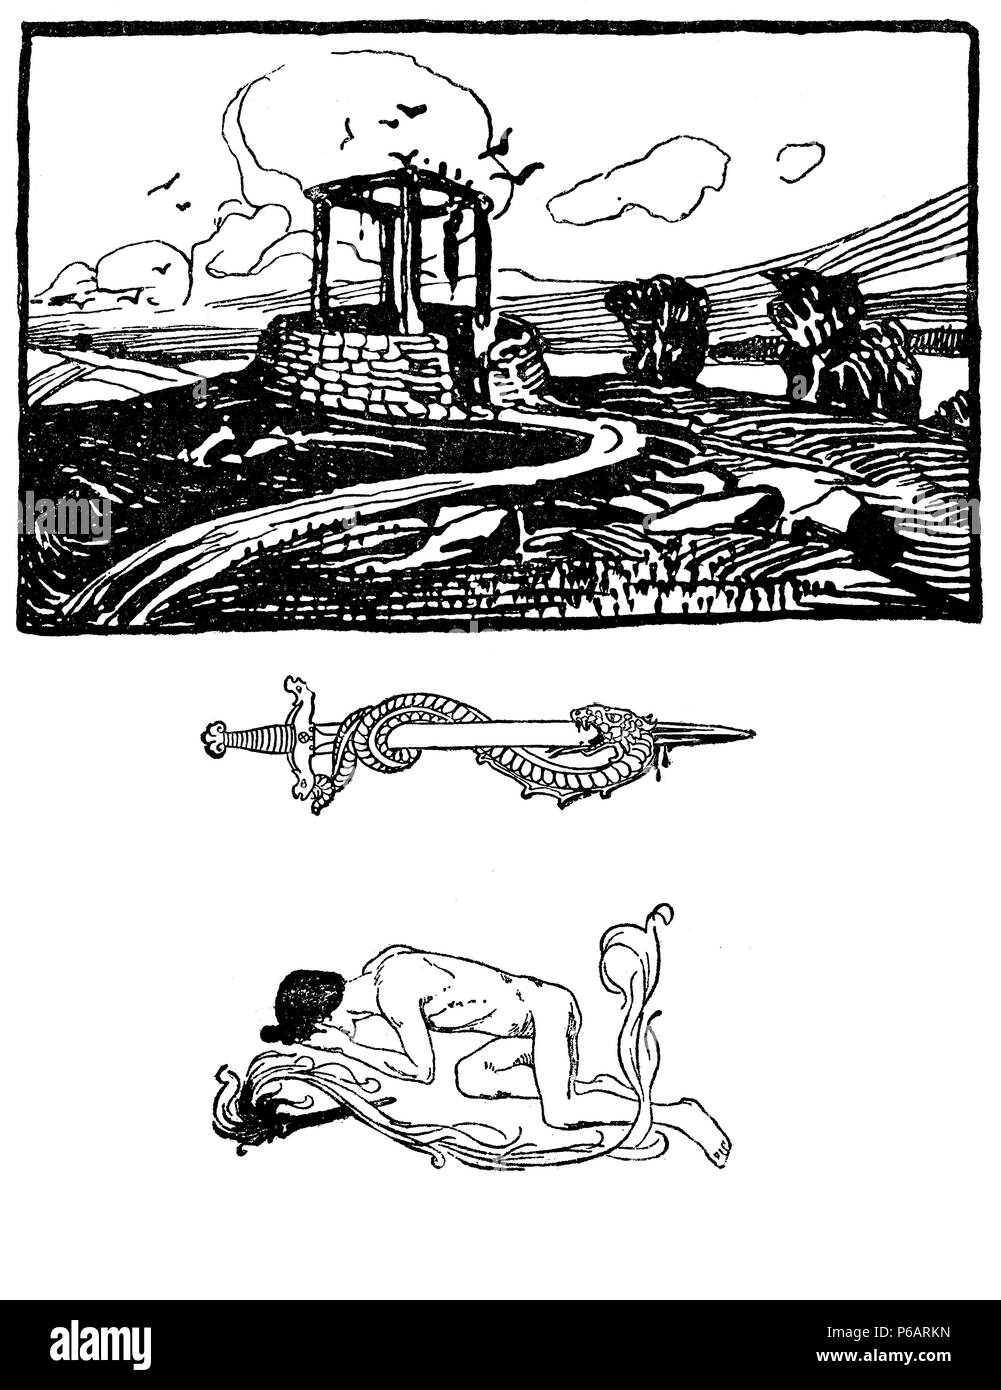 Typographic decorative art deco elements early '900: stylized landscape,sword and snake, human figure as banner, border and end chapter decoration Stock Photo